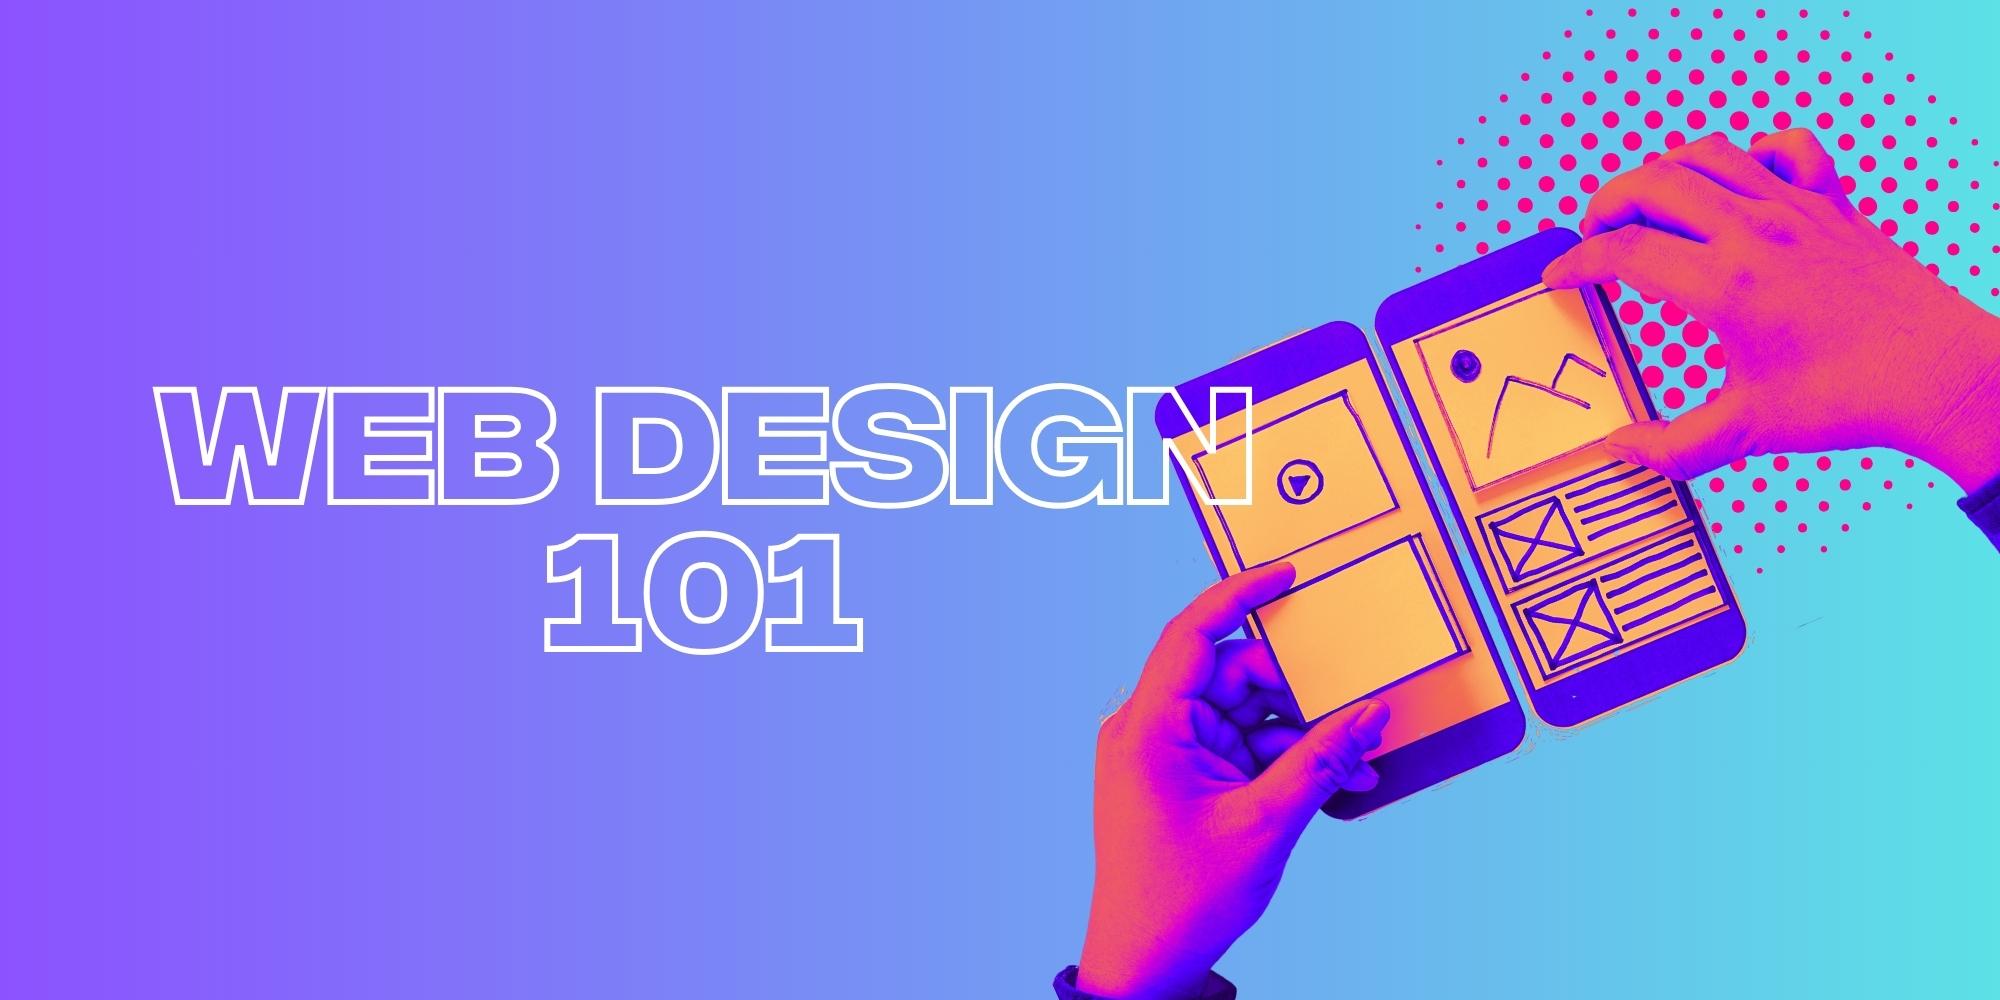 The Ultimate Guide to Web Design